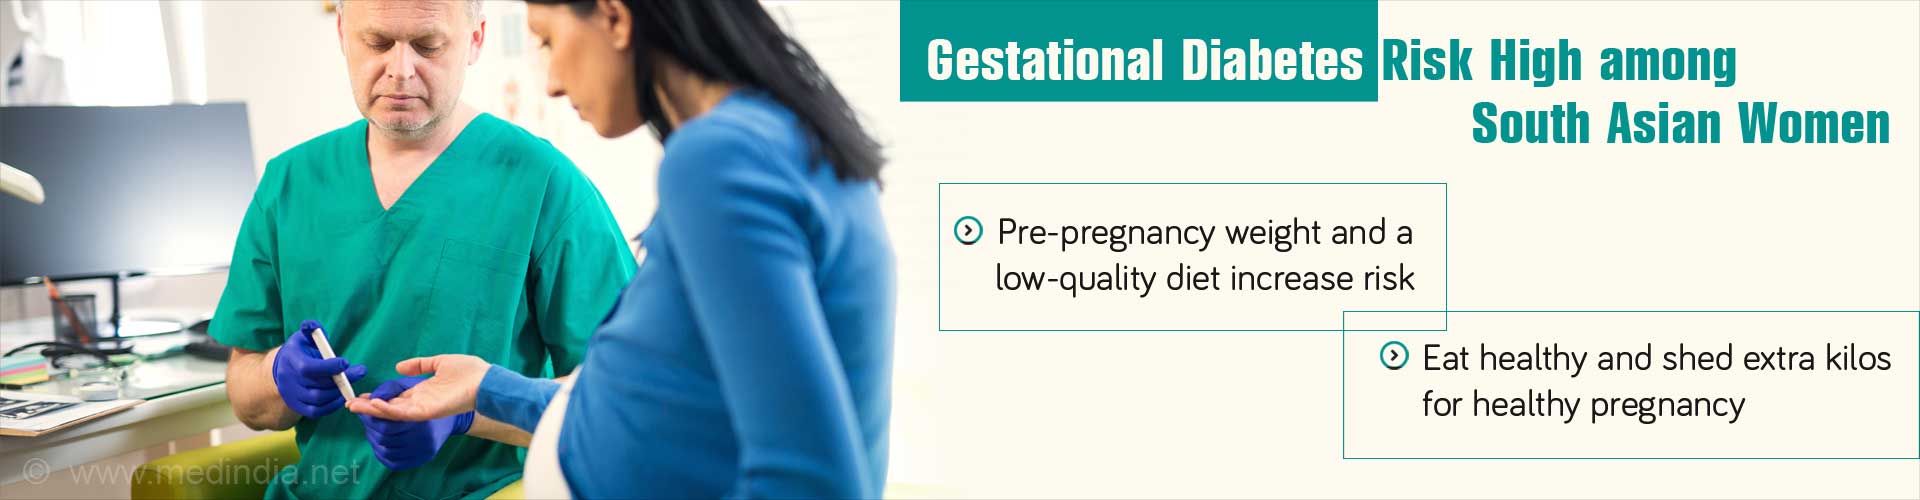 gestational diabetes risk high among south asian women
- pre-preganancy weight and a low-quality diet increase risk
- eat healthy and shed extra kilos for healthy pregancy